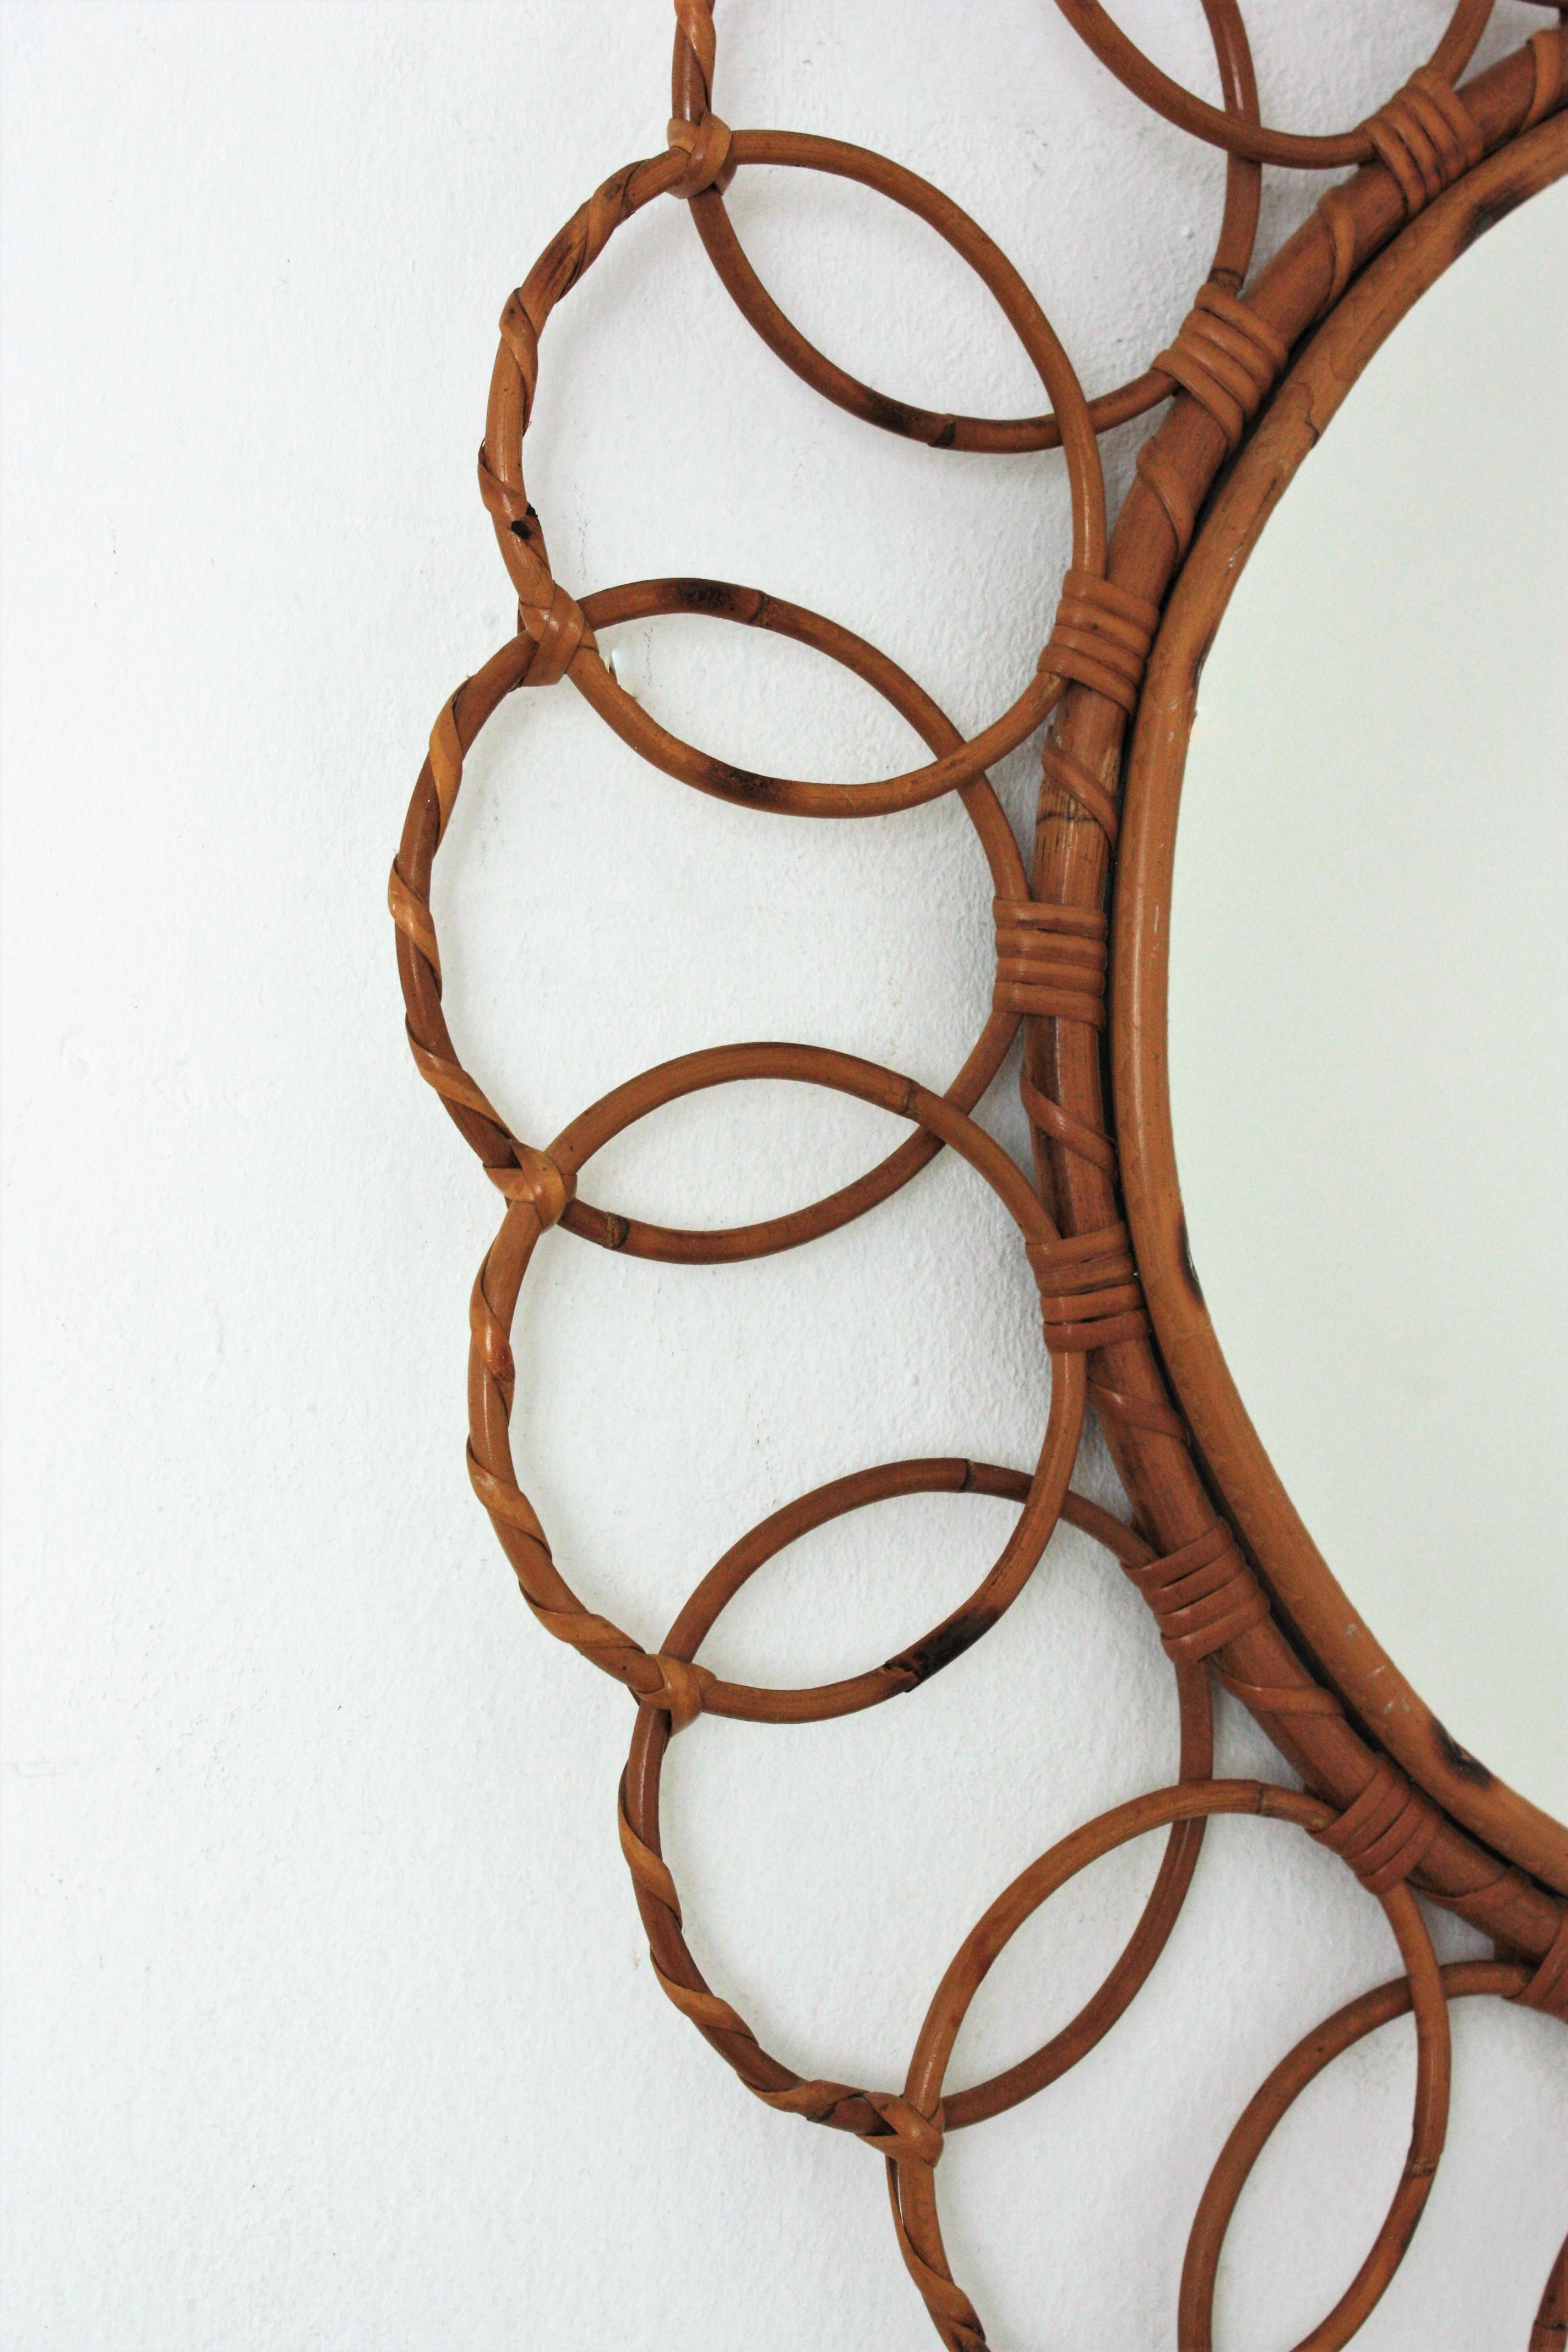 Bamboo Rattan Round Mirror with Rings Frame, 1960s